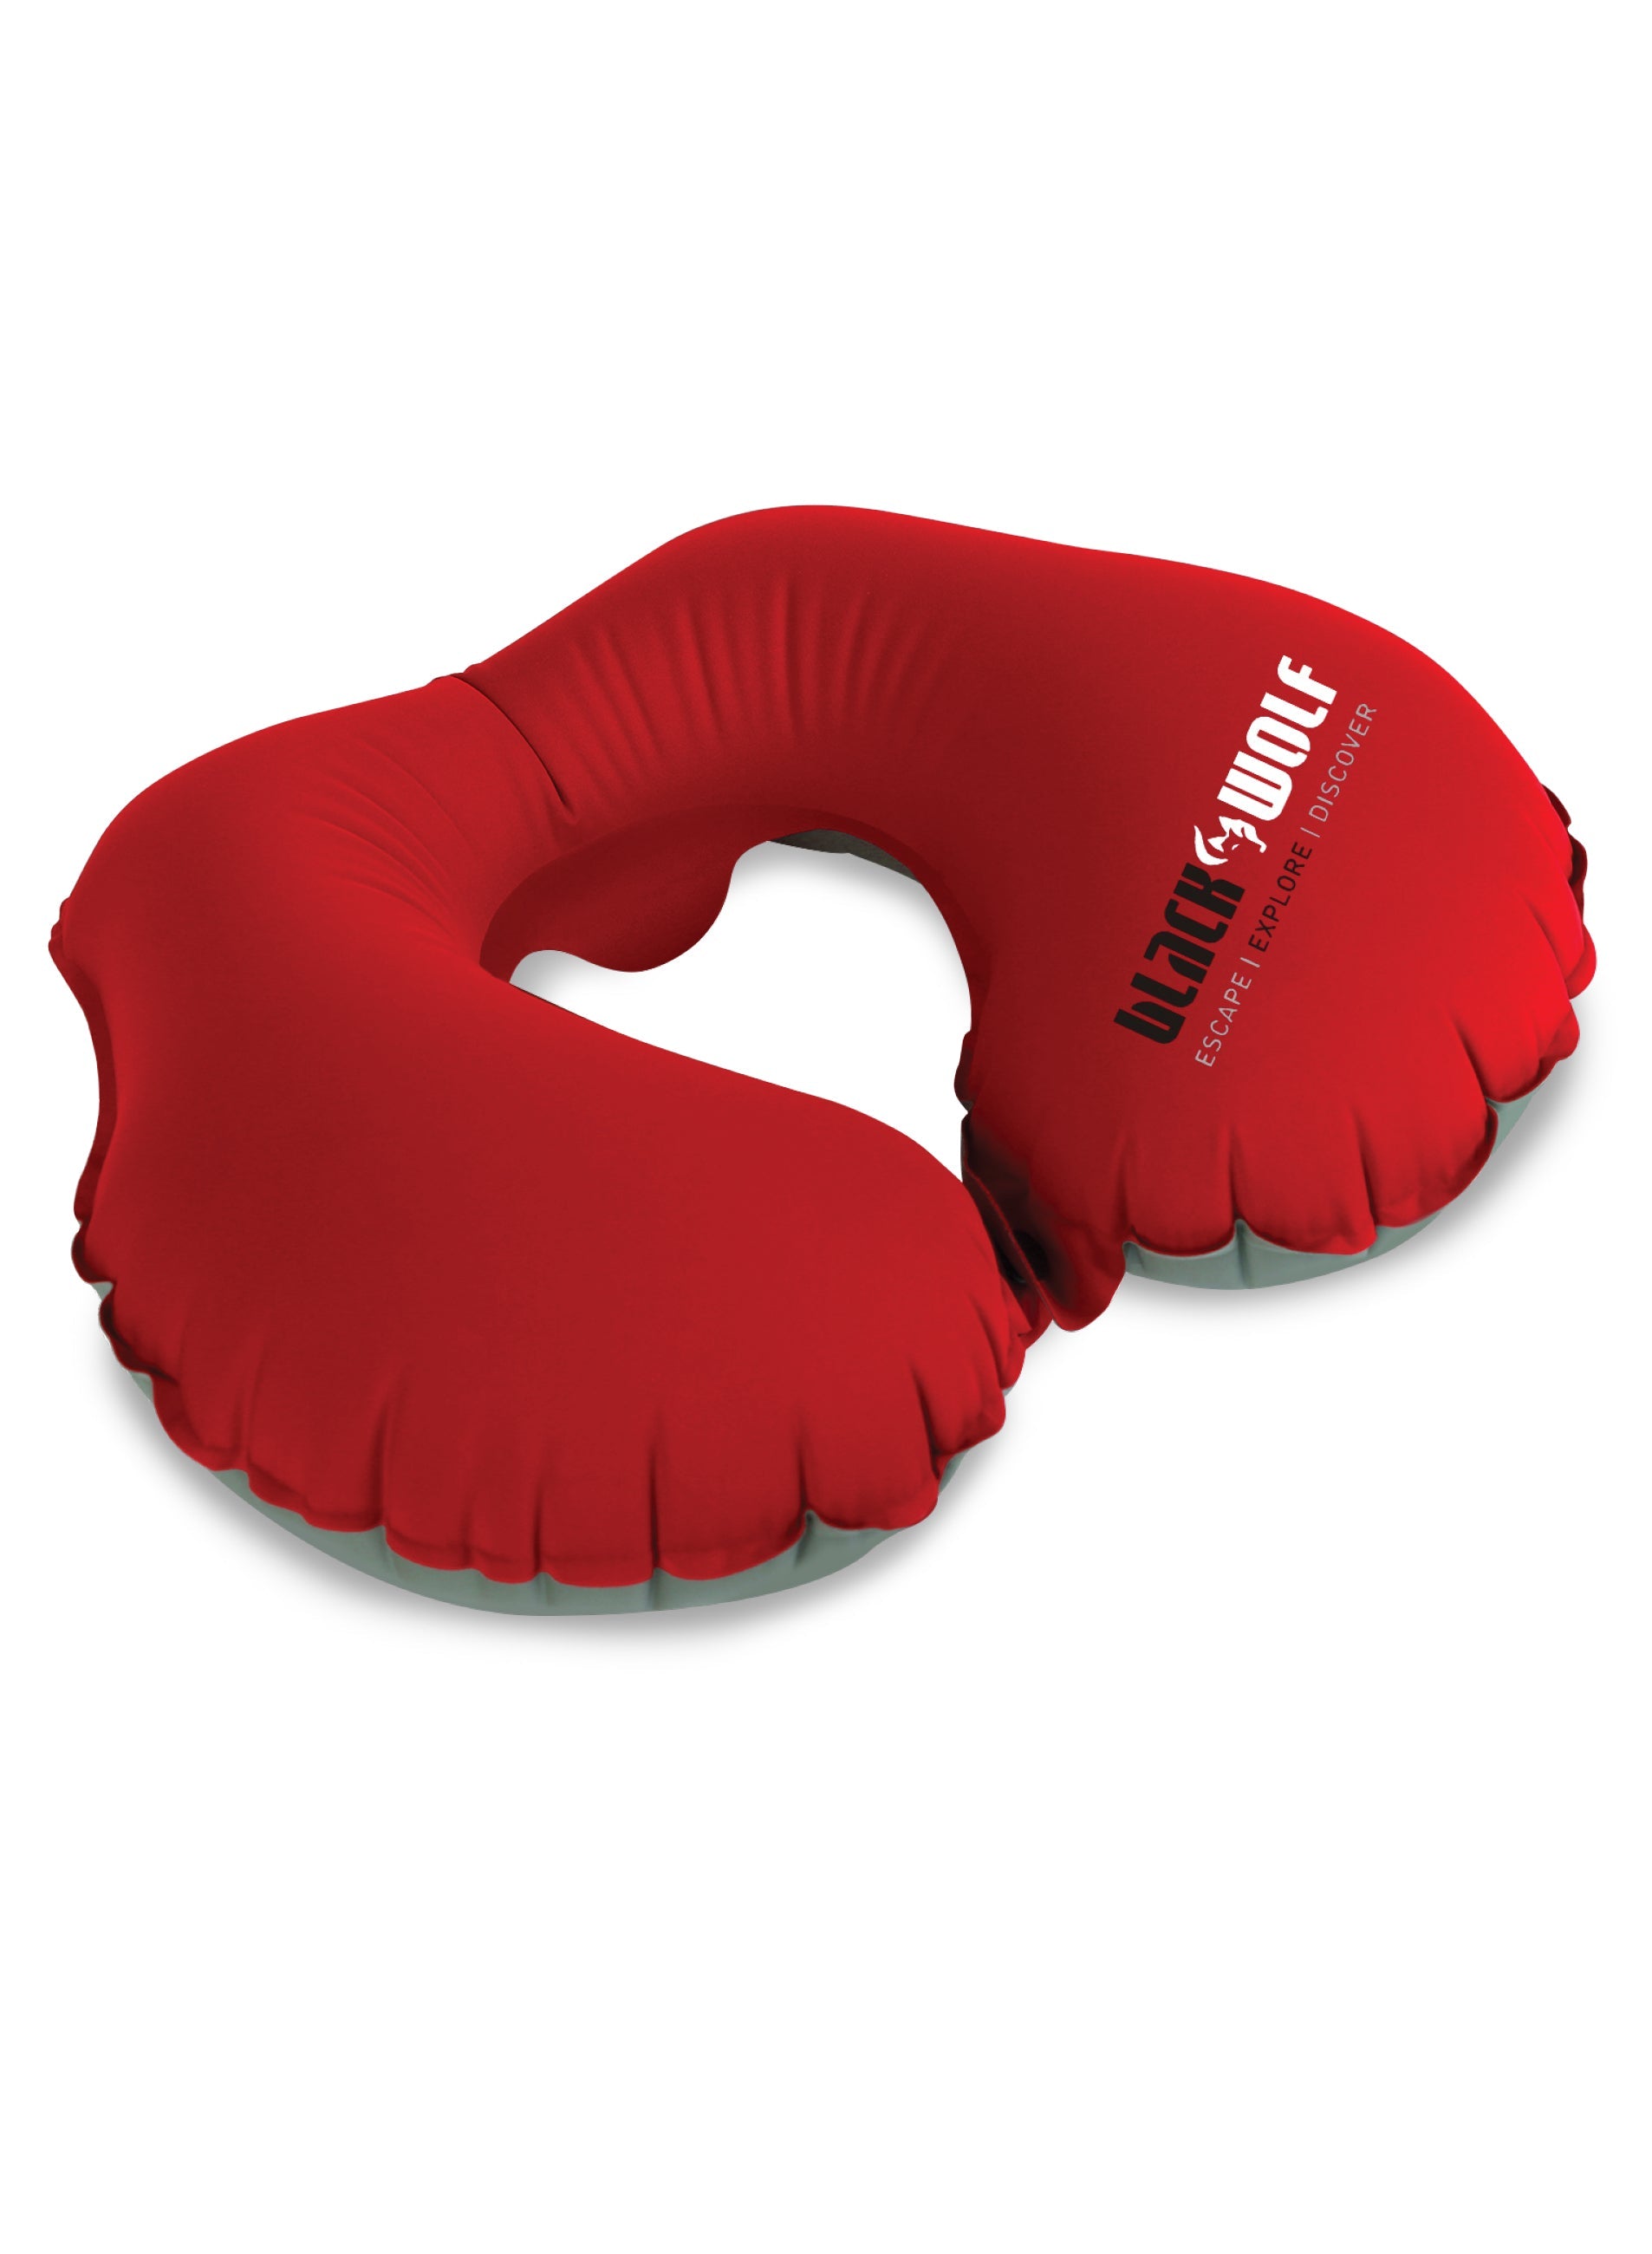 Black Wolf - Air-Lite Travel inflatable neck pillow - RED-1